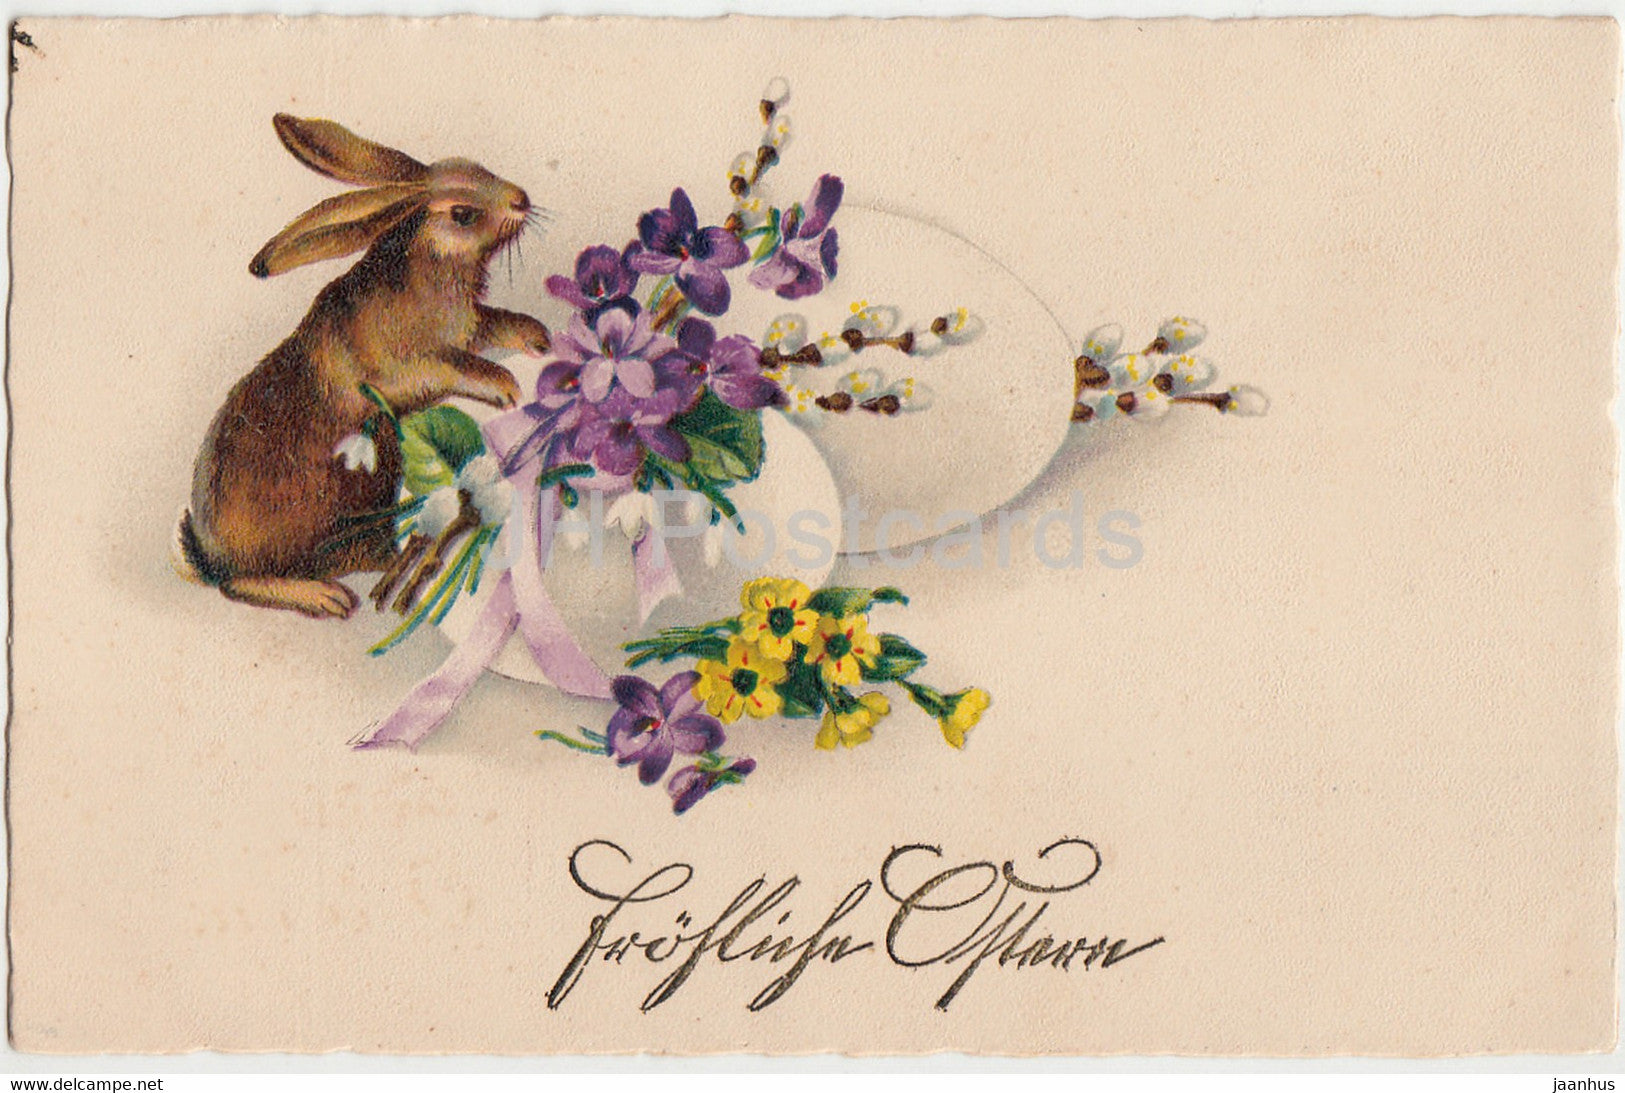 Easter Greeting Card - Frohliche Ostern - egg - rabbit - flowers - HWB SER 2074 - old postcard - Germany - unused - JH Postcards